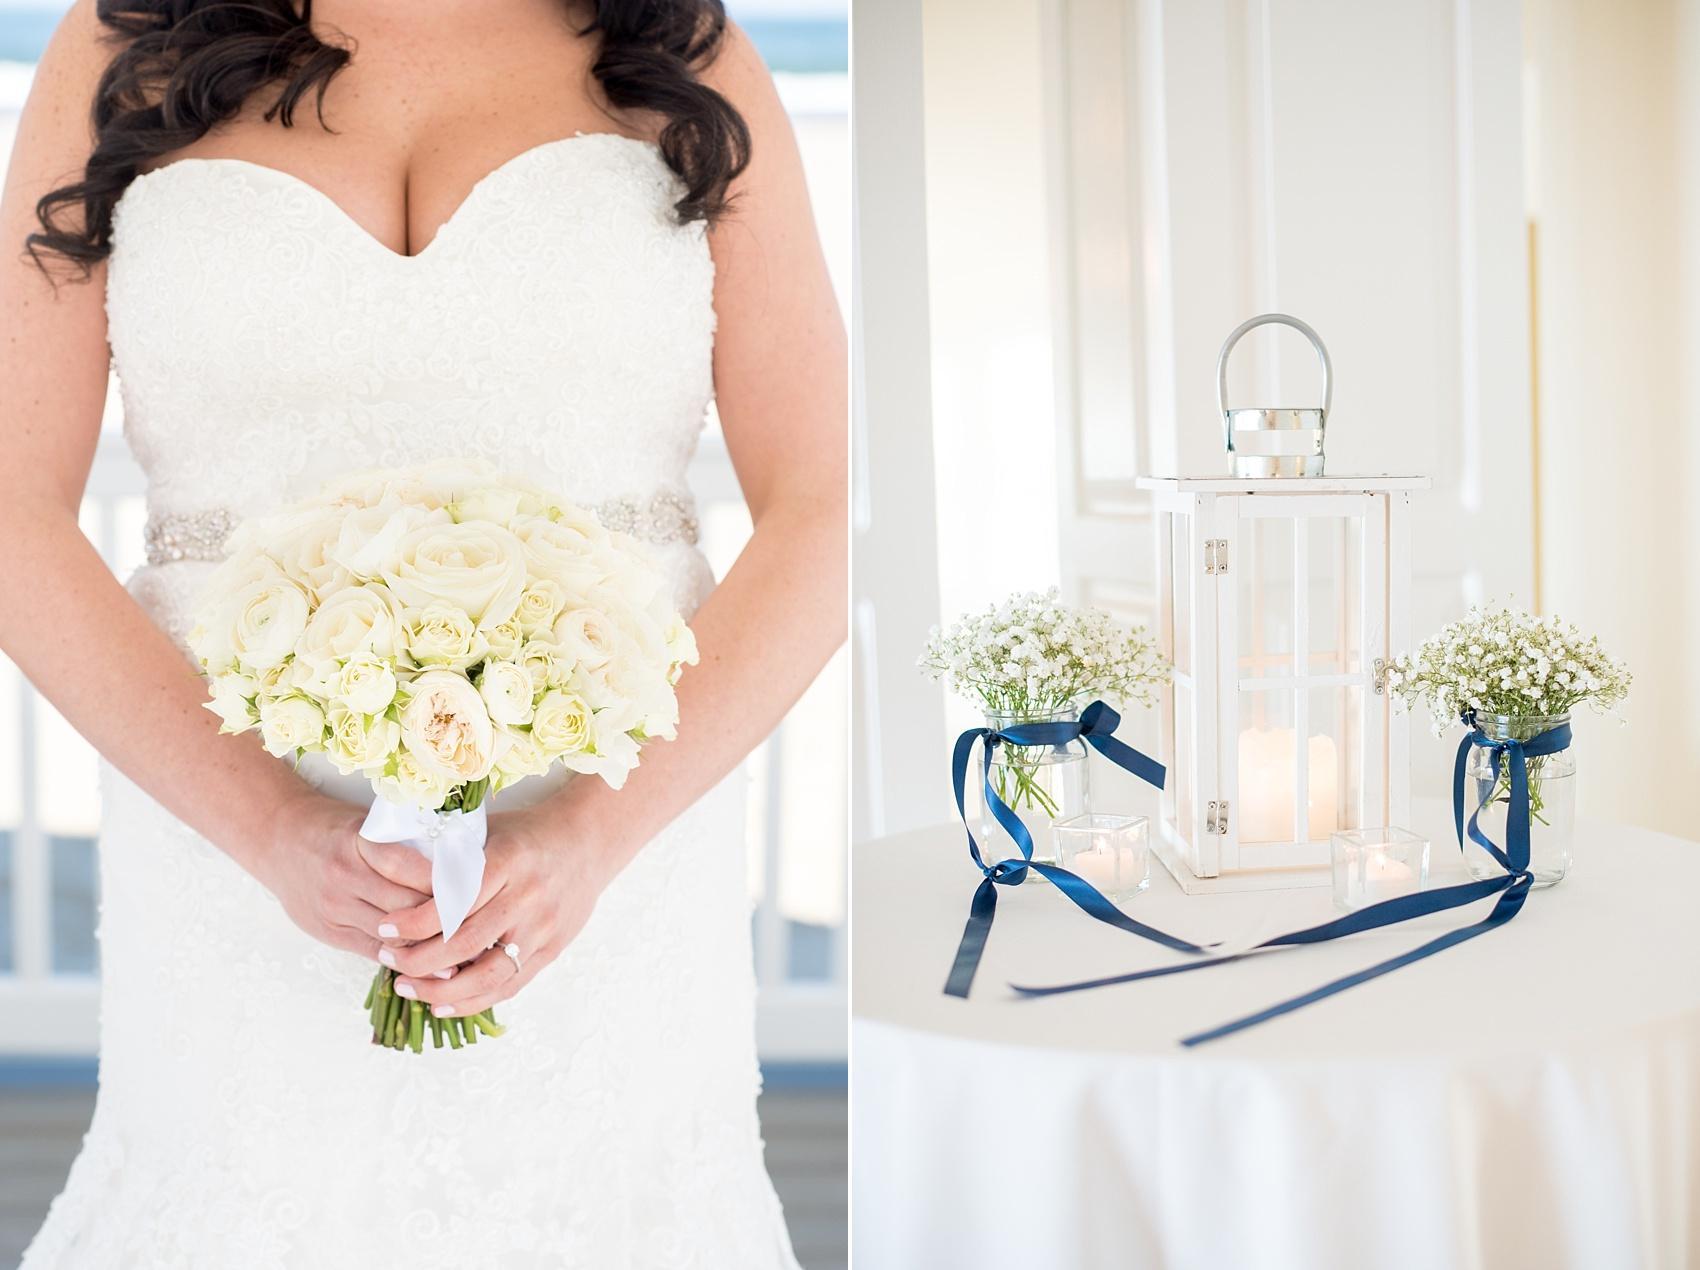 Photo by Mikkel Paige photography. Windows on the Water beach wedding with white garden roses and Baby's Breath flowers and navy blue accents.